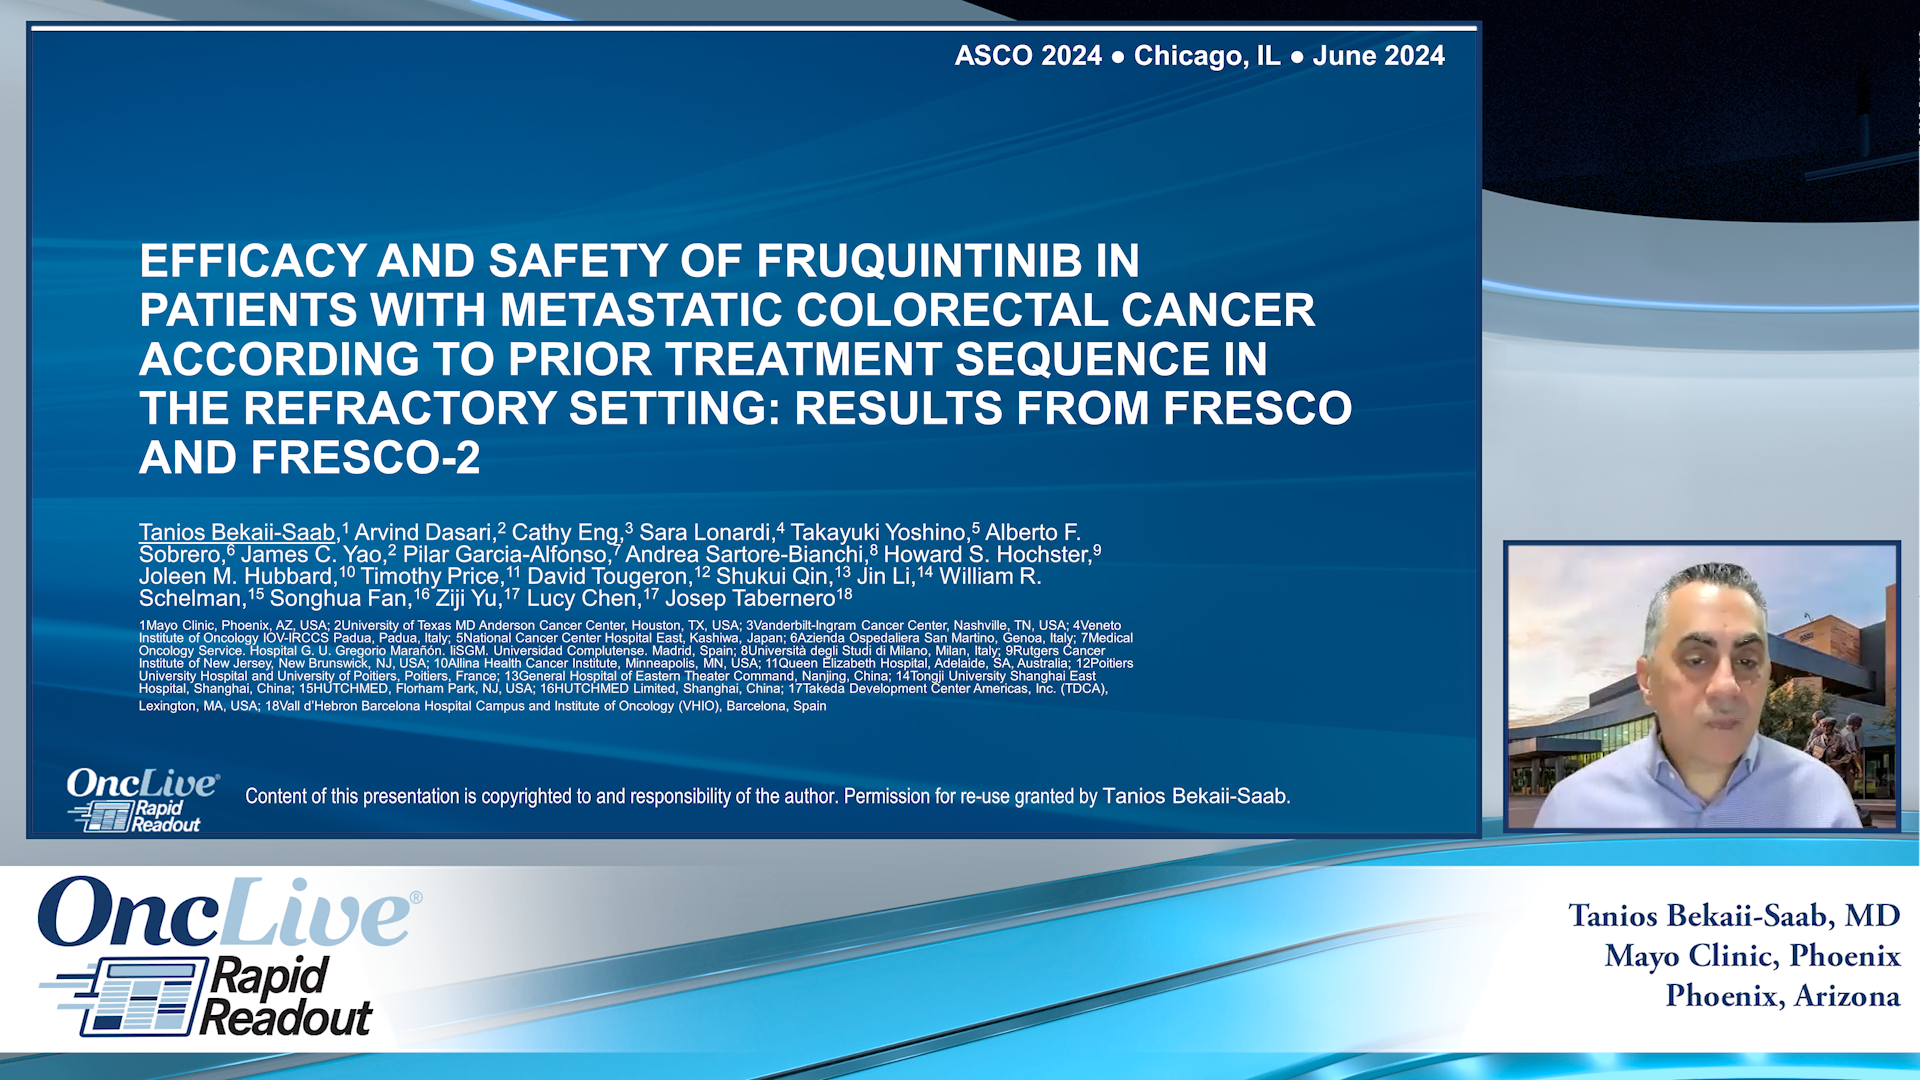 Efficacy and Safety of Fruquintinib in Patients With Metastatic Colorectal Cancer According to Prior Treatment Sequence in the Refractory Setting: Results From FRESCO and FRESCO-2